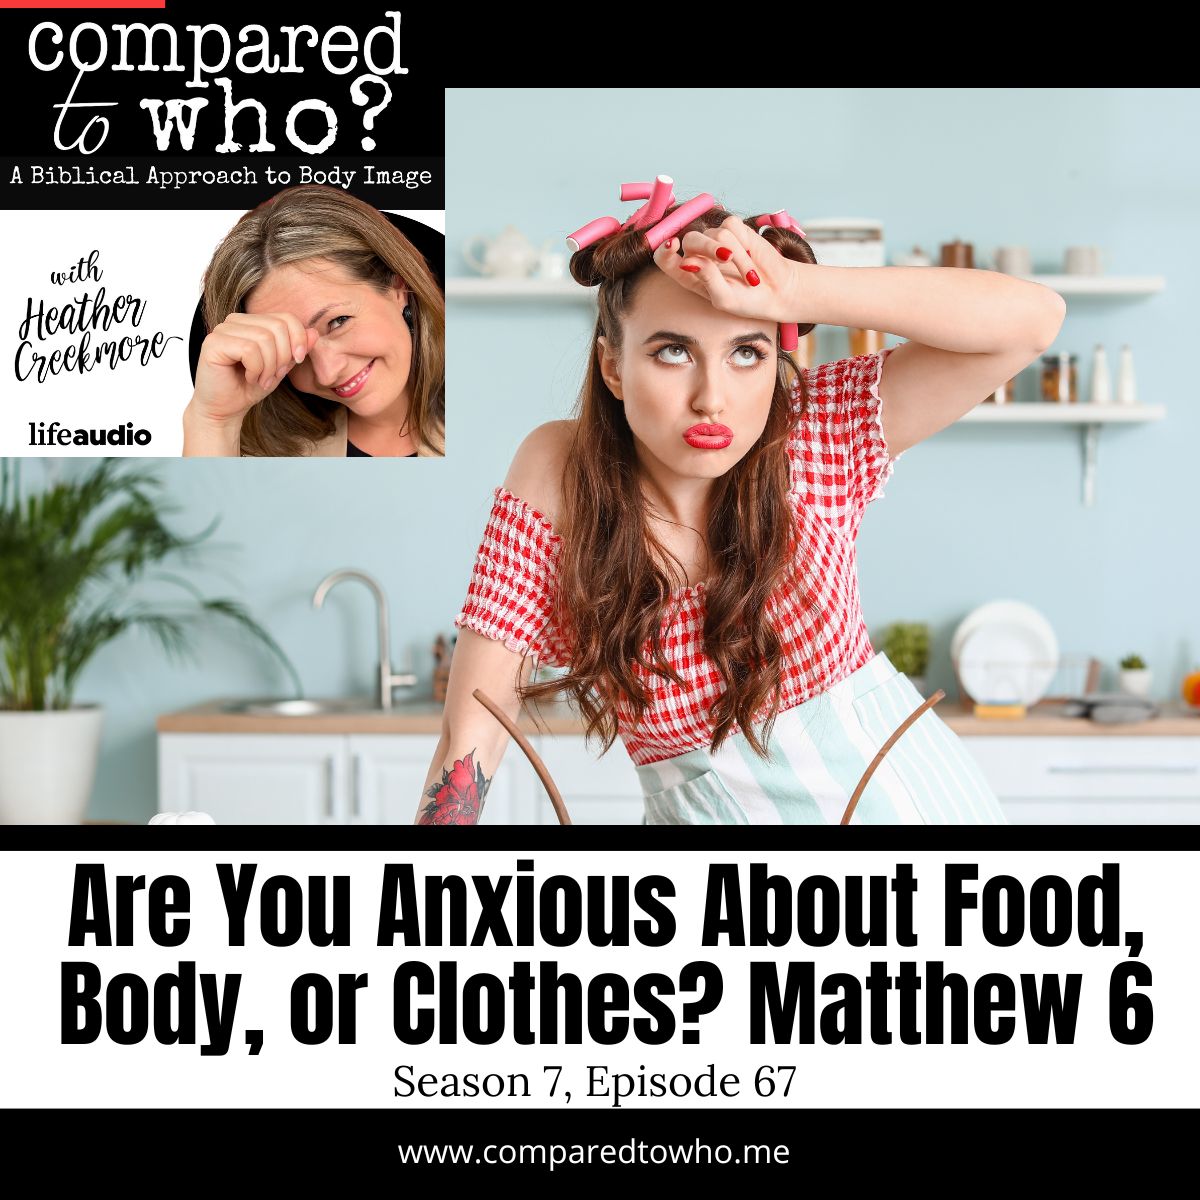 Are You Anxious About Food, Clothes or Body? Matthew 6